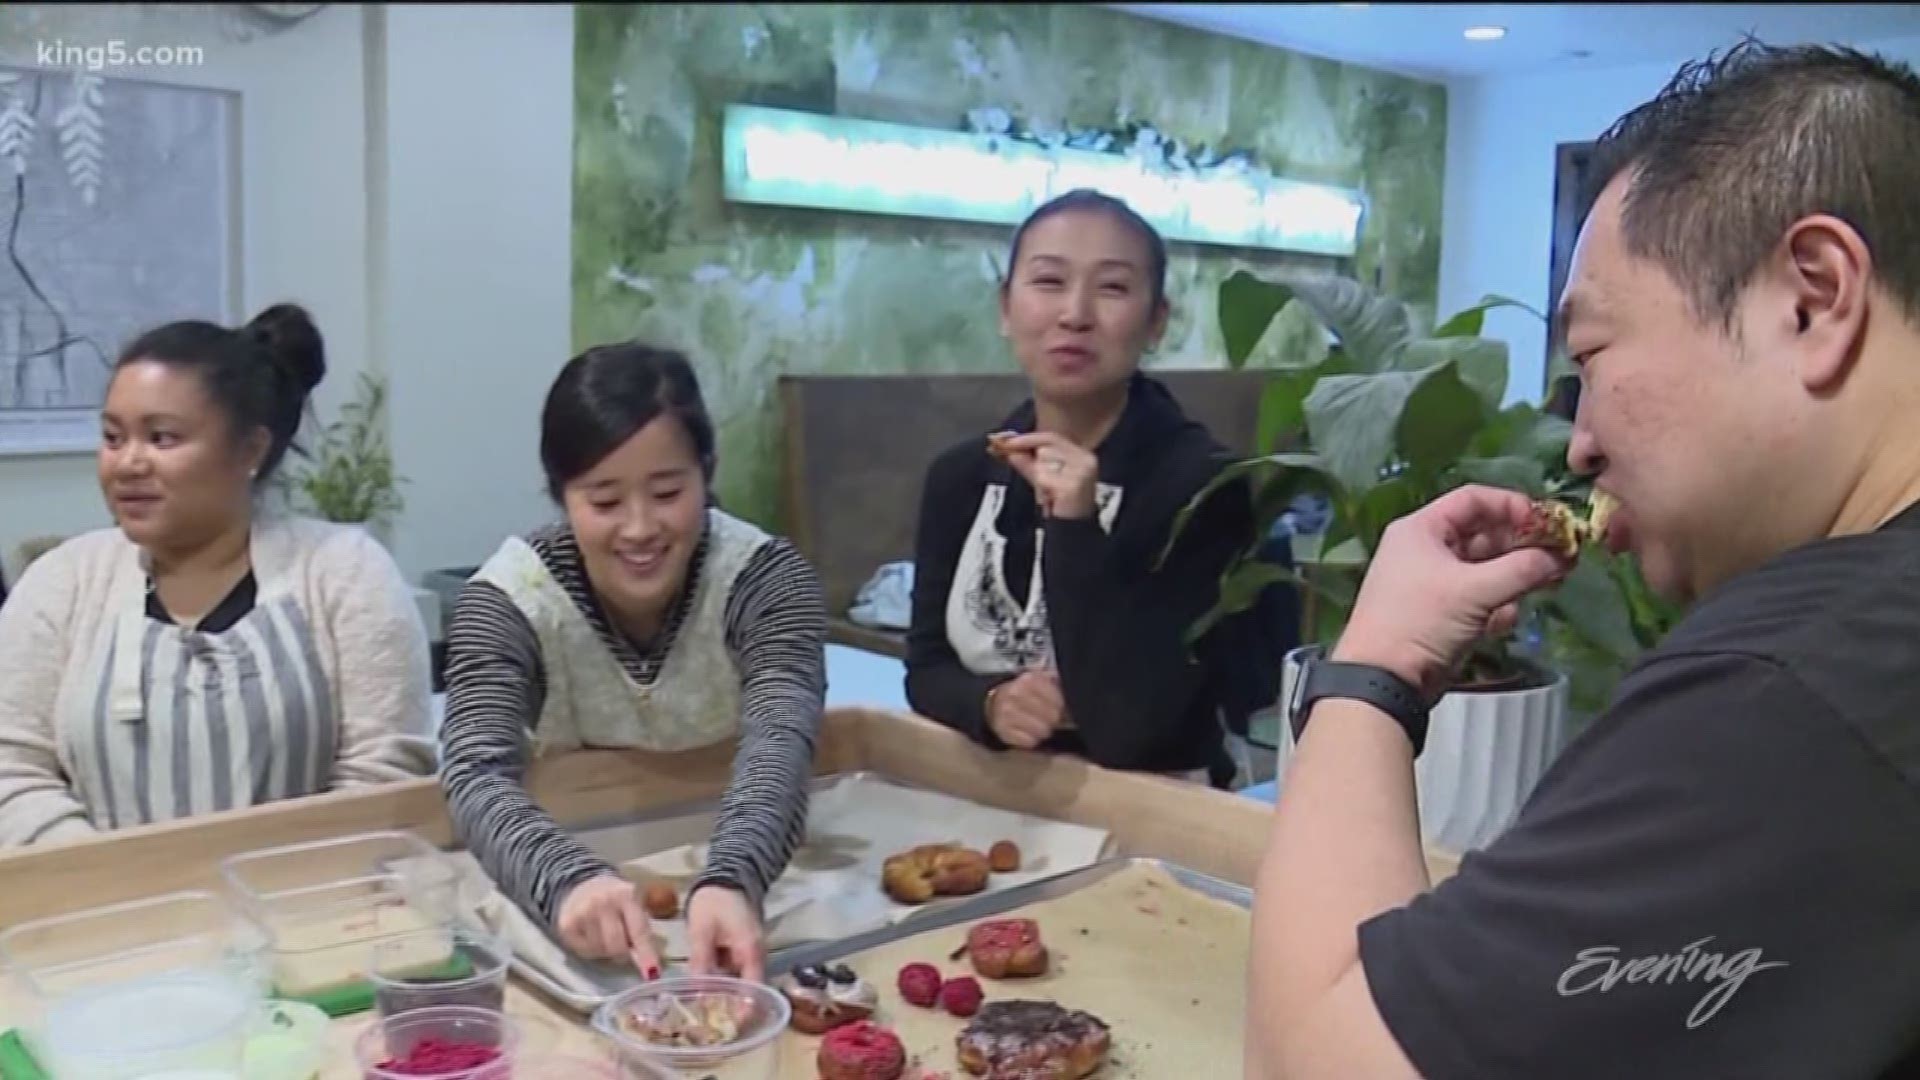 Raised Doughnuts owner Mi Kim hosts monthly doughnut-making (and eating) classes- so you can learn from an expert!